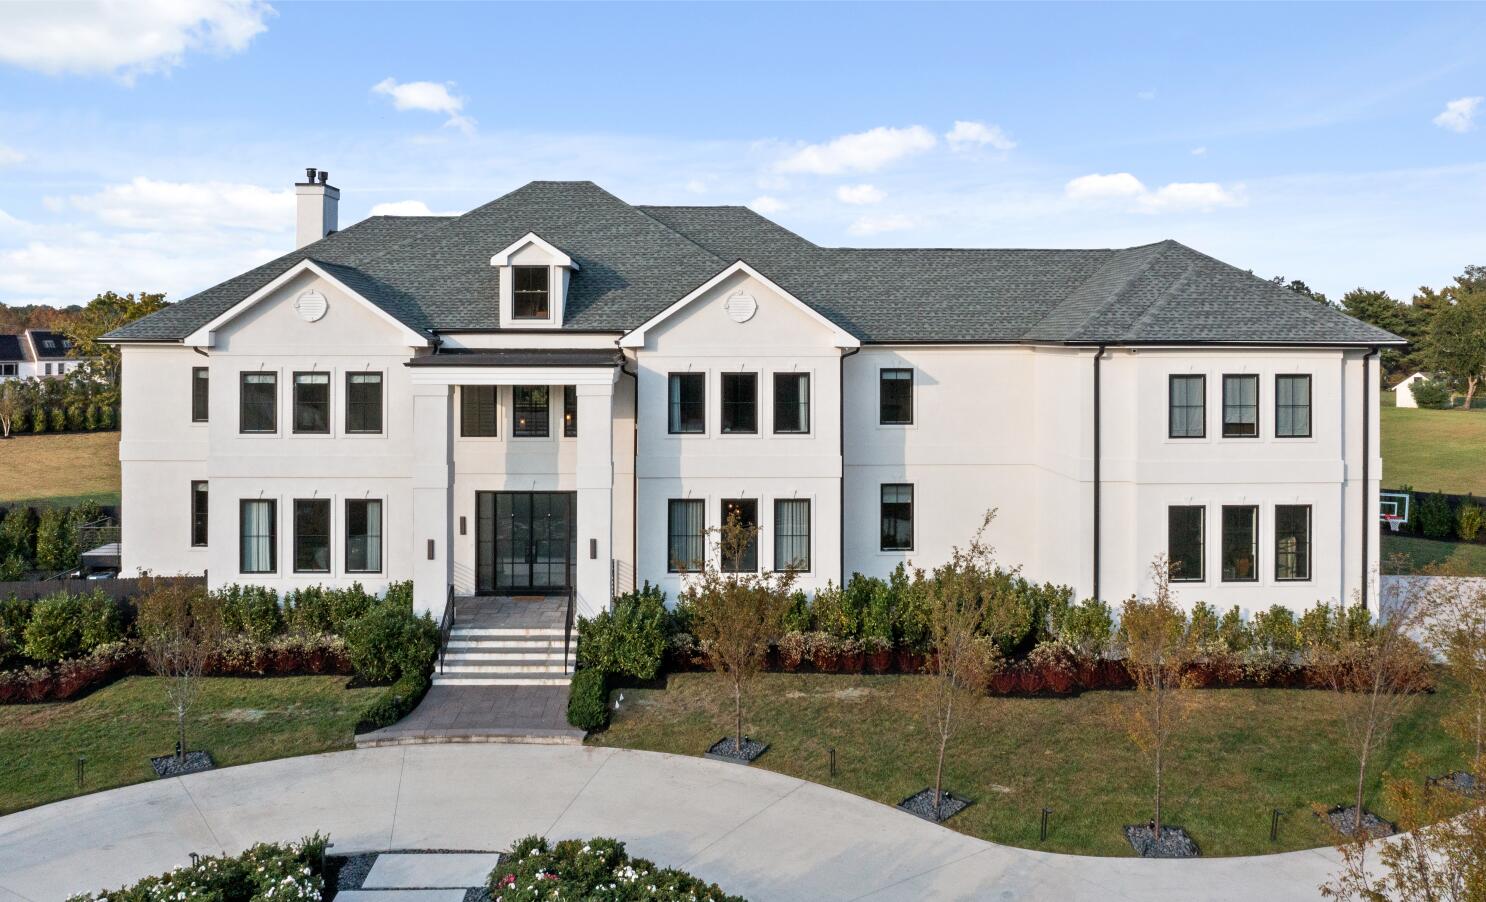 Ben Simmons Putting Moorestown House Up for Sale - Crossing Broad